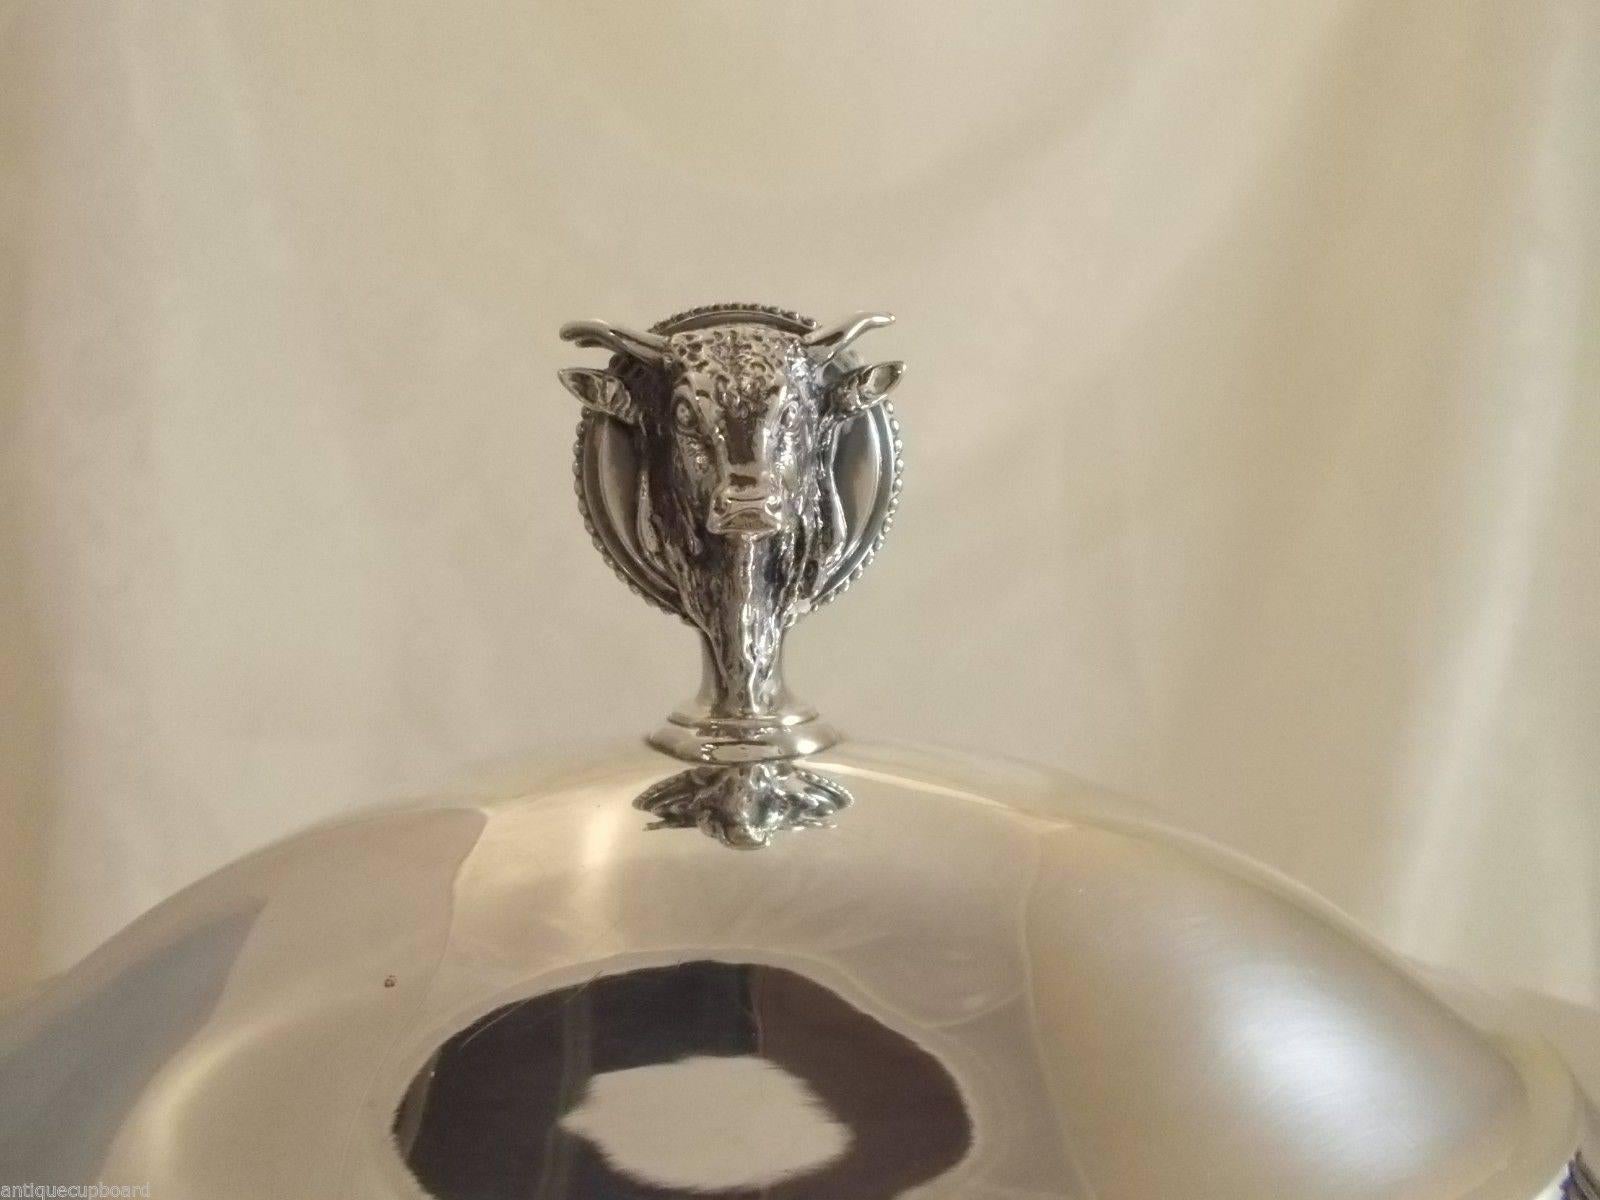 Gorham Sterling Silver Tureen with 3D Bull Finial Figural Exceptional Hollowware 1